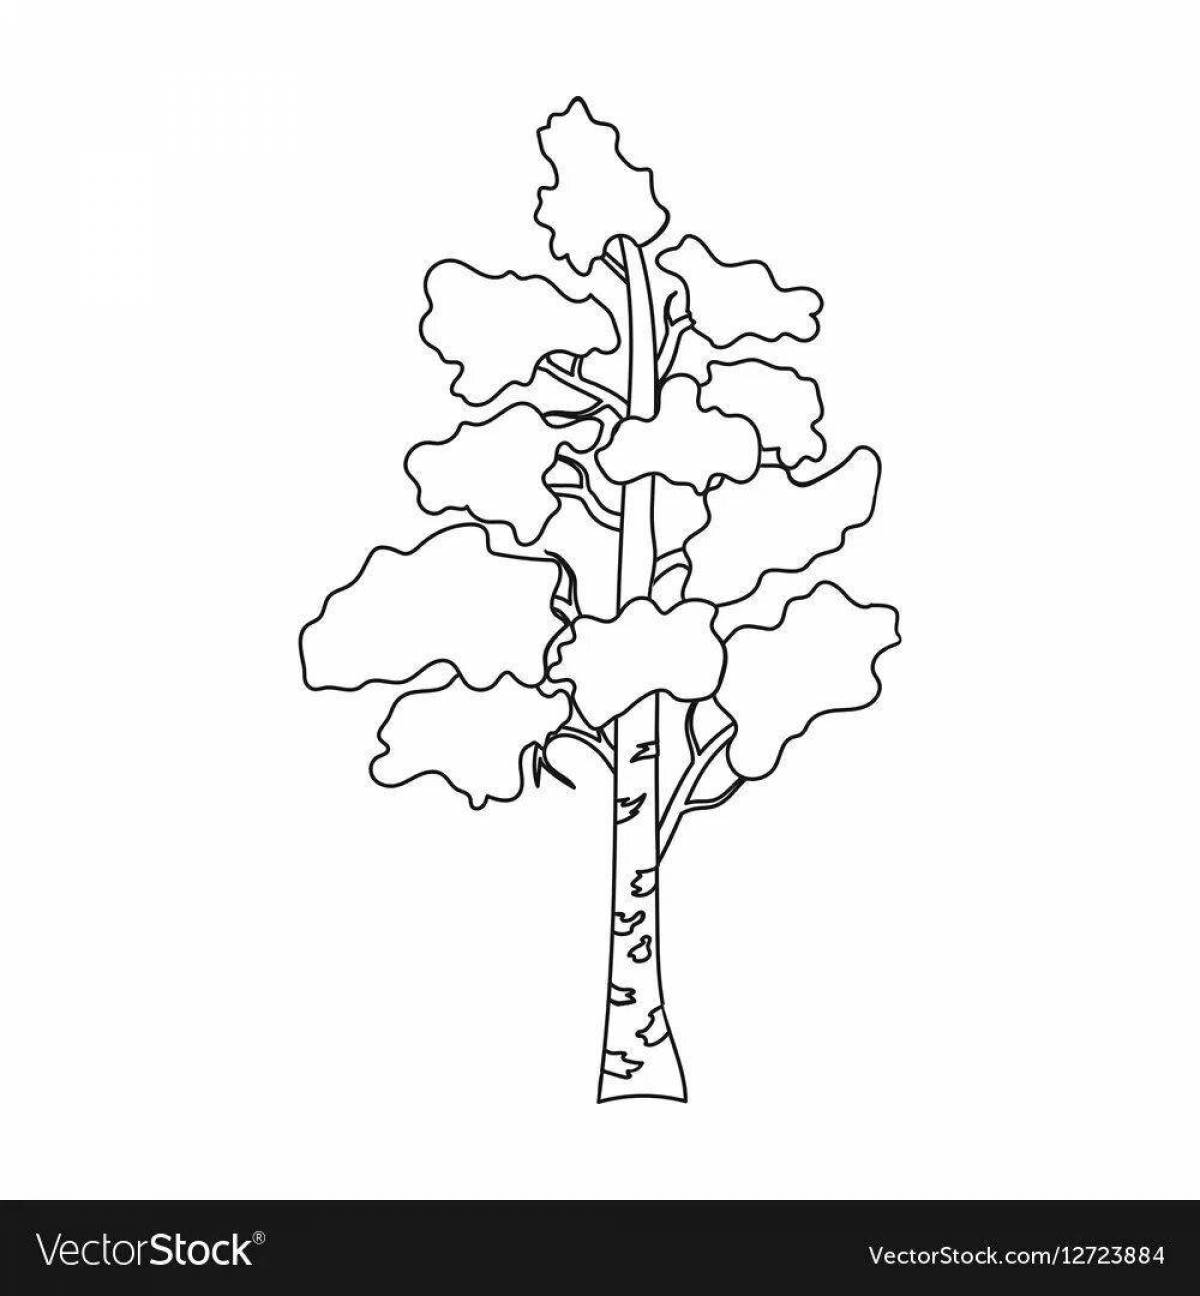 Coloring page playful winter birch